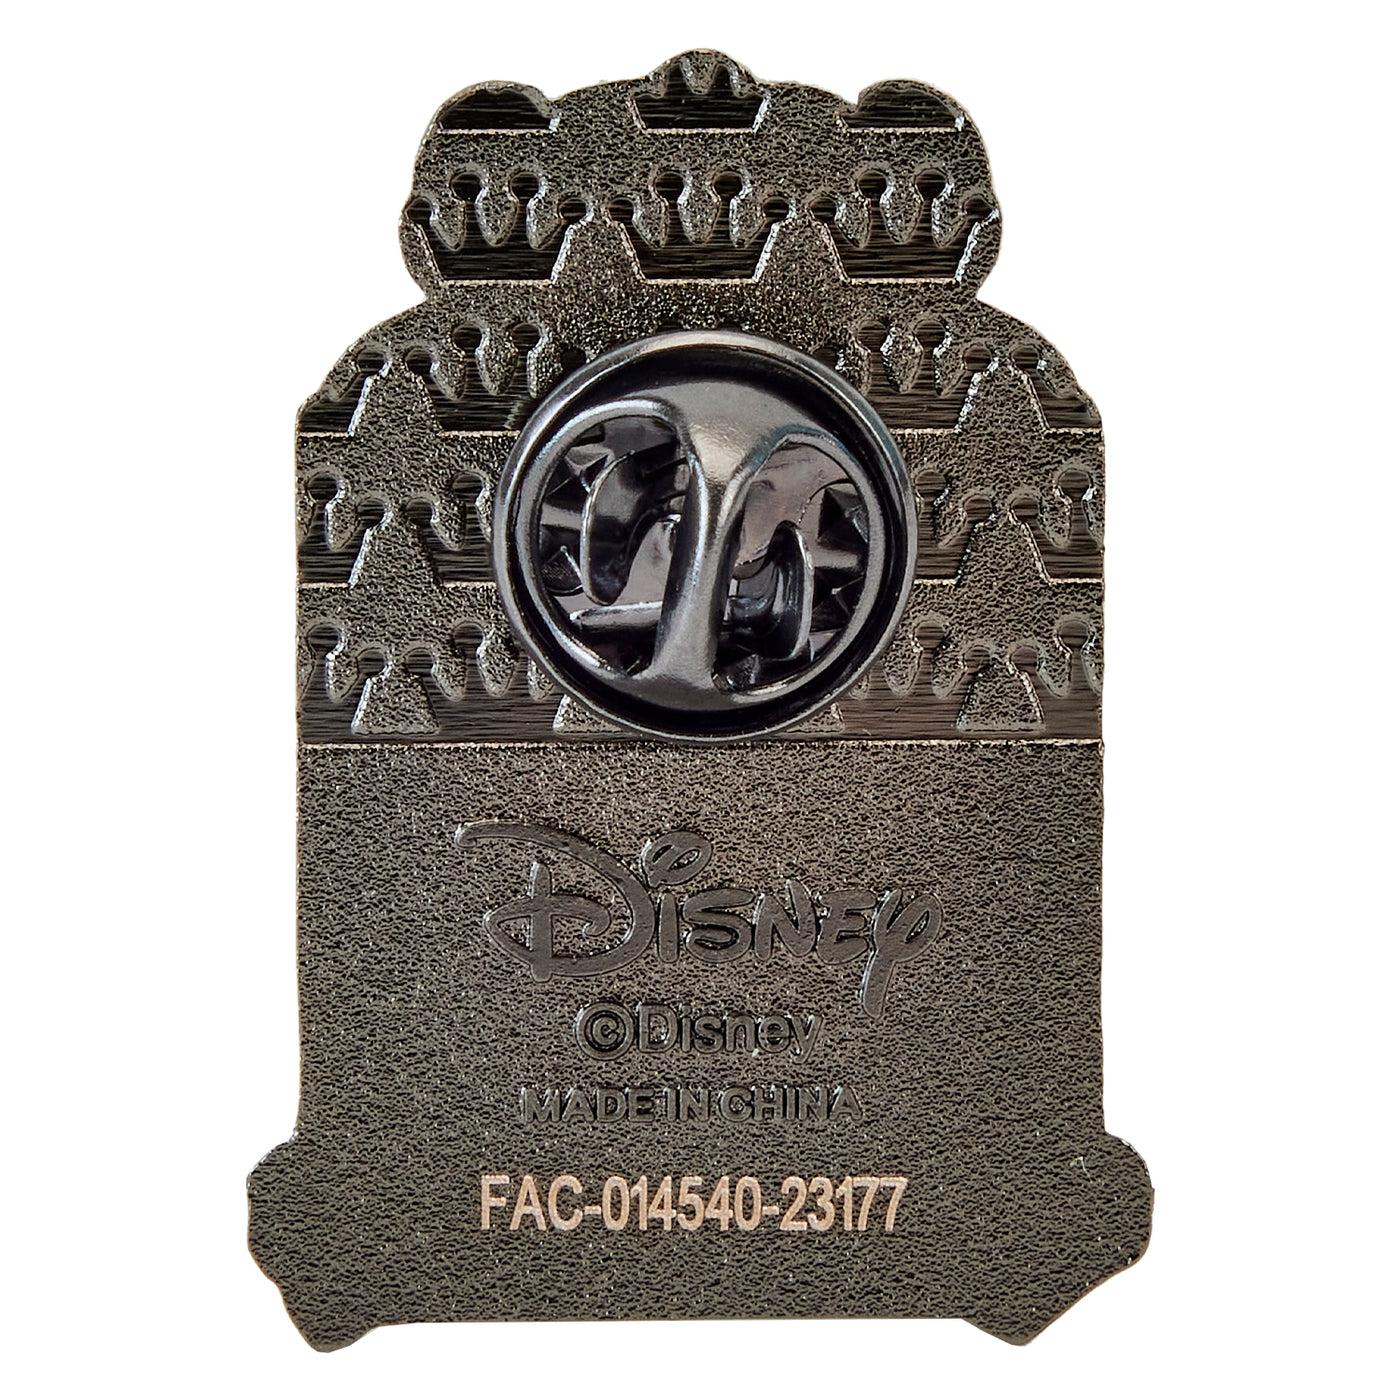 Loungefly Disney Haunted Mansion Blind Box Pin